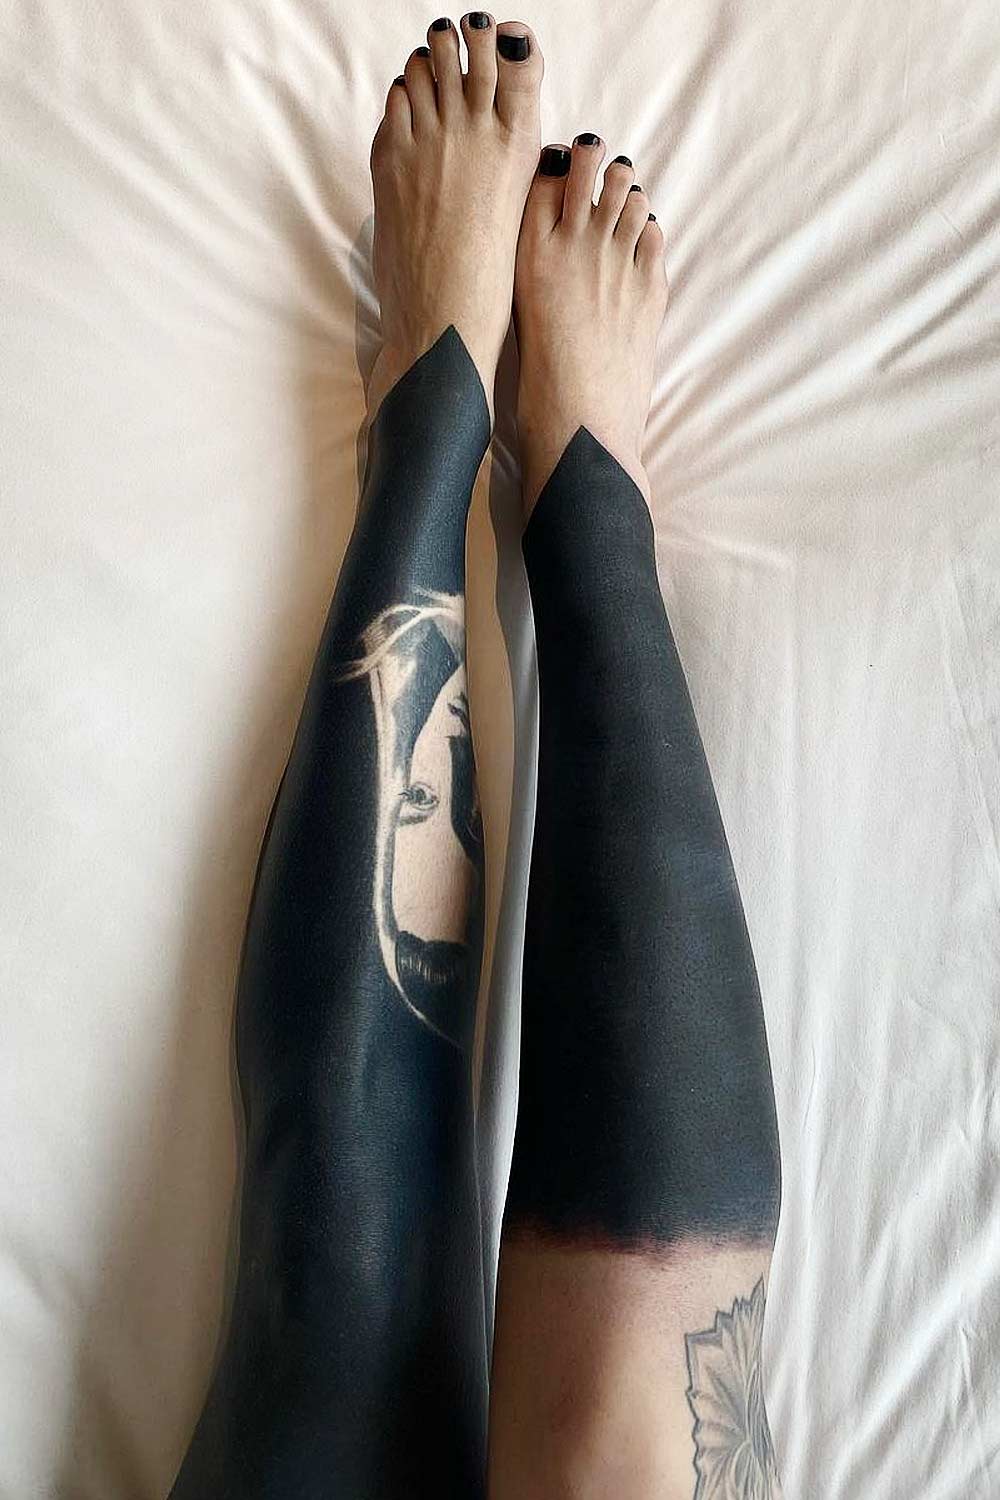 Legs Blackout Tattoos and Portrait